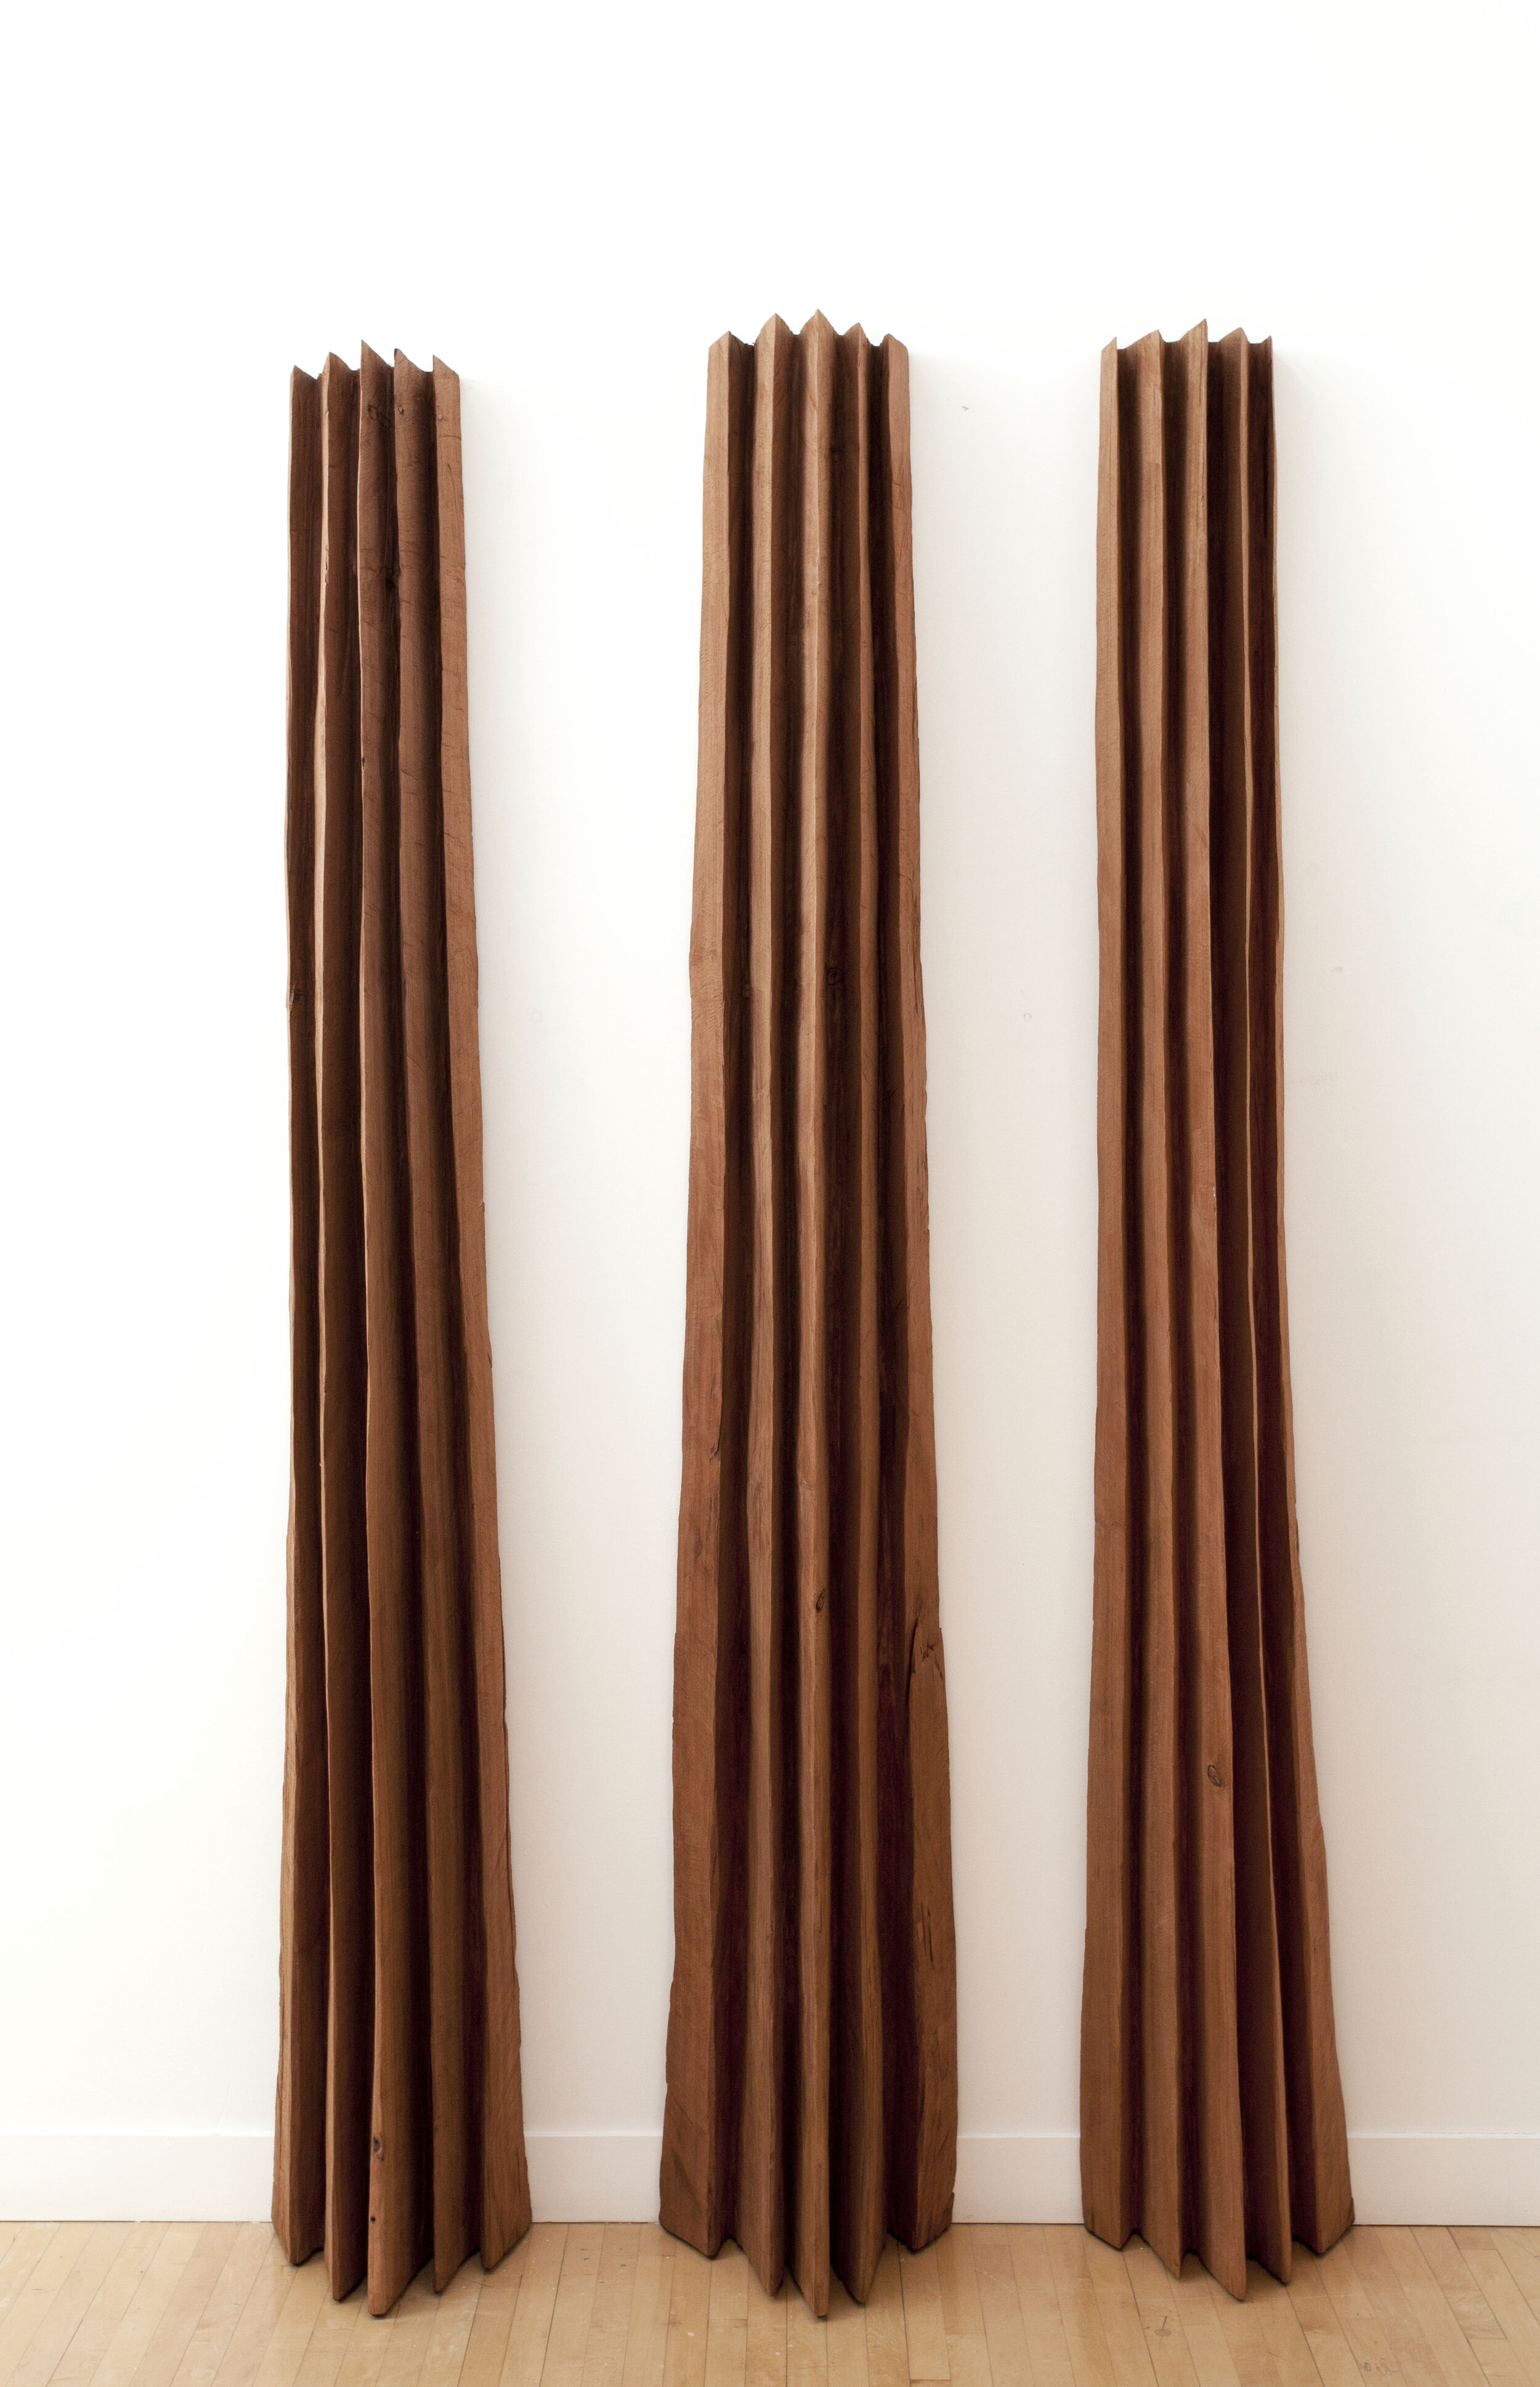  David Nash,  Three Red Sheaves,  2013 Redwood | Three parts, overall as installed: 116 x 67 x 16 inches | HG11788 